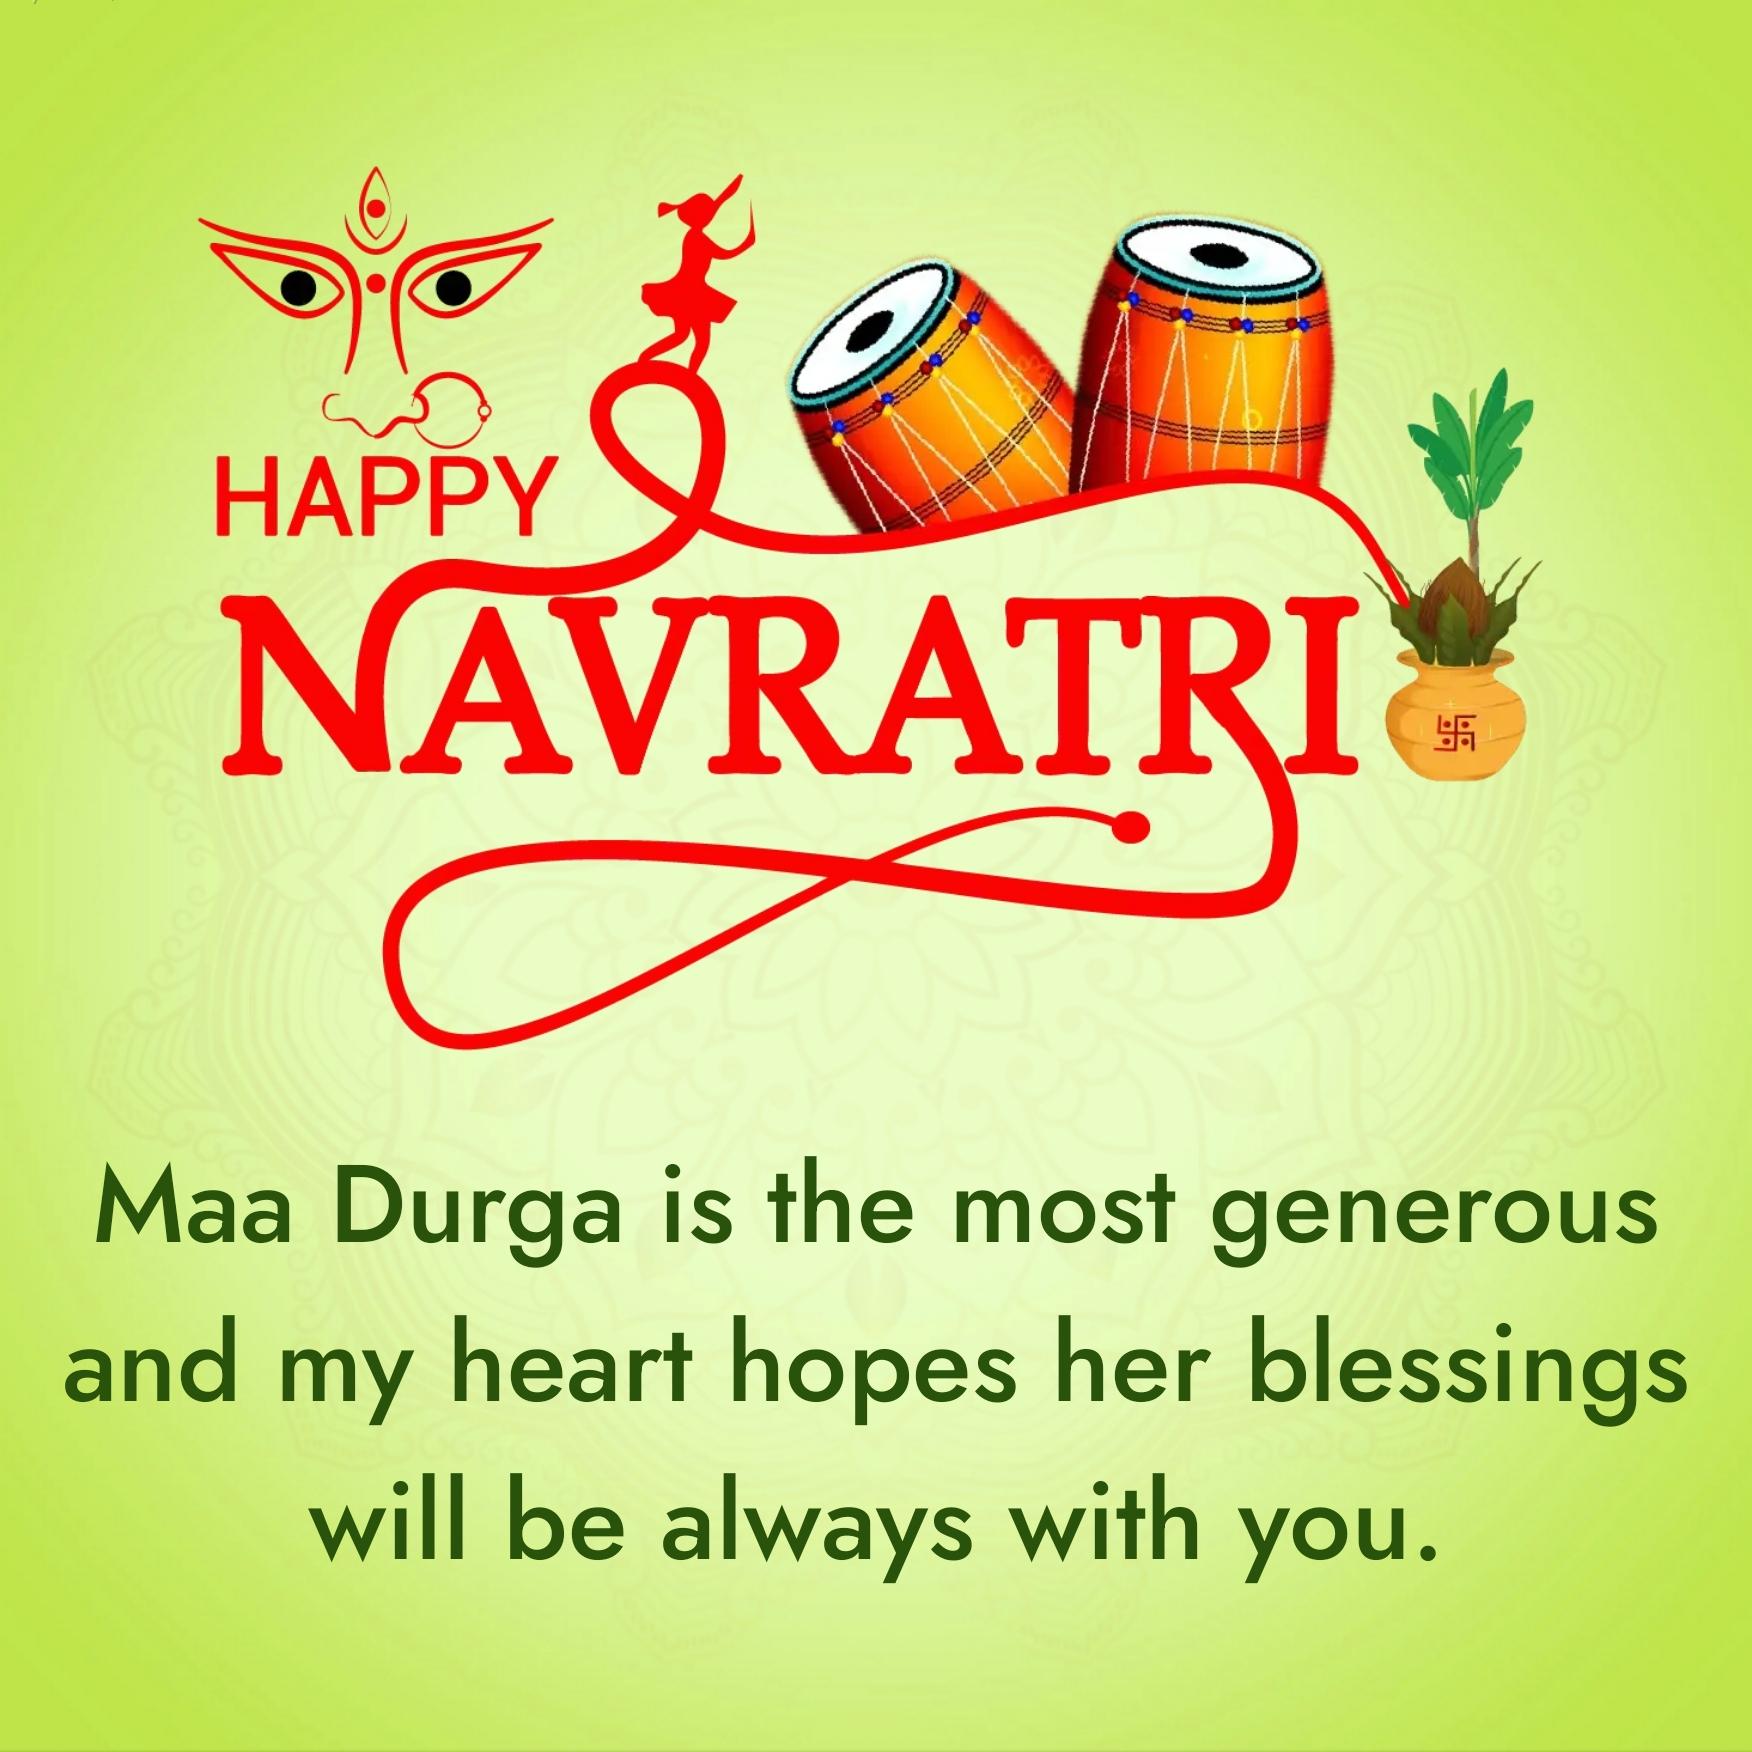 Maa Durga is the most generous and my heart hopes